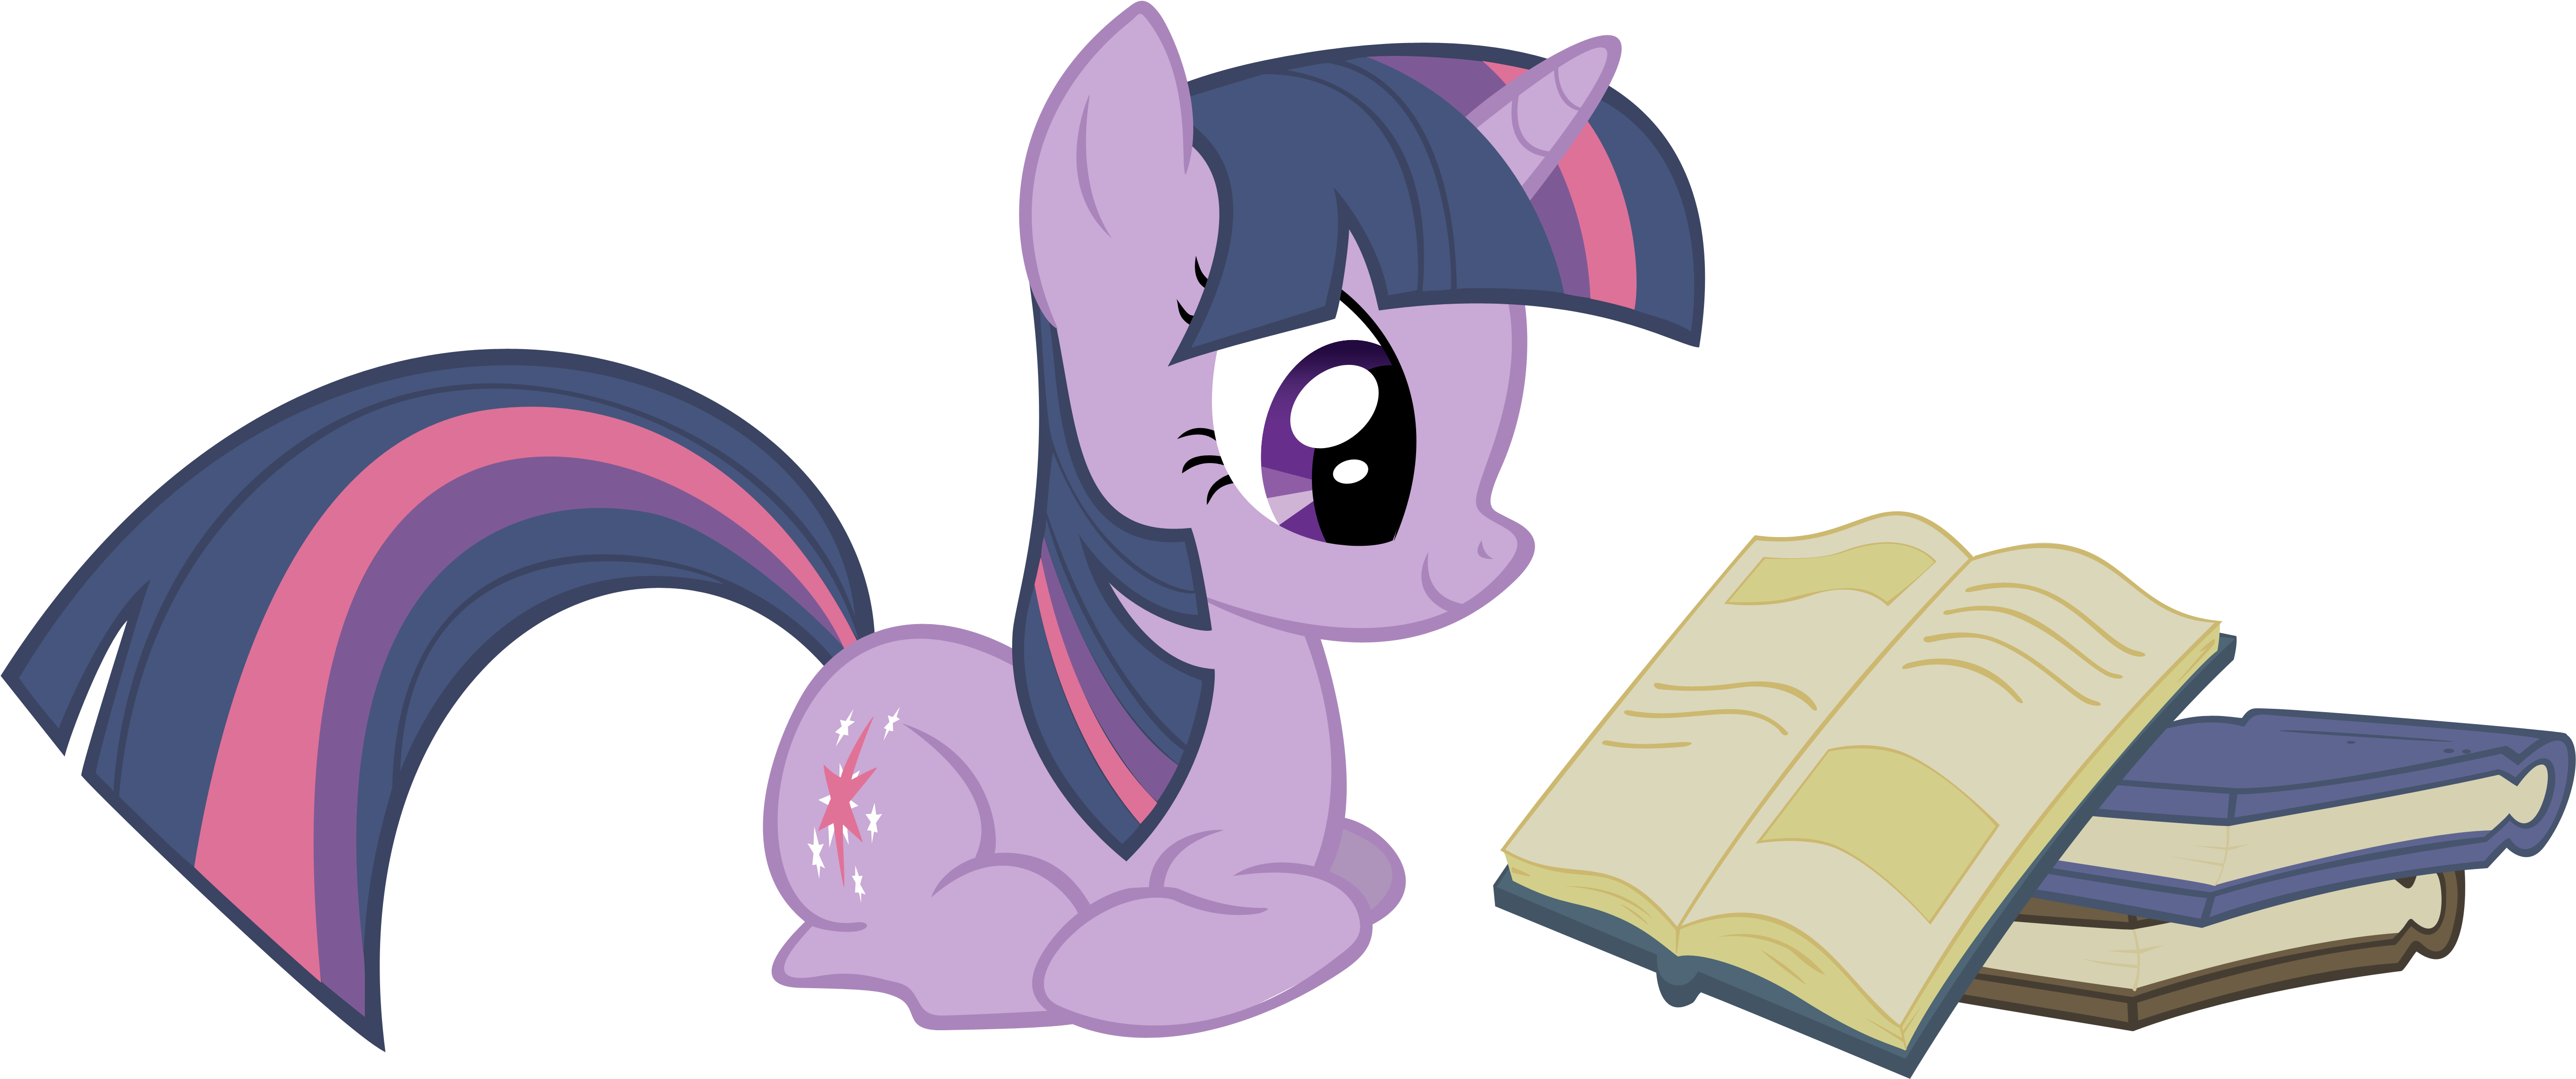 Theflutterknight, Book, Reading, Safe, Simple Background, - Twilight Sparkle And Spike (5721x2790)